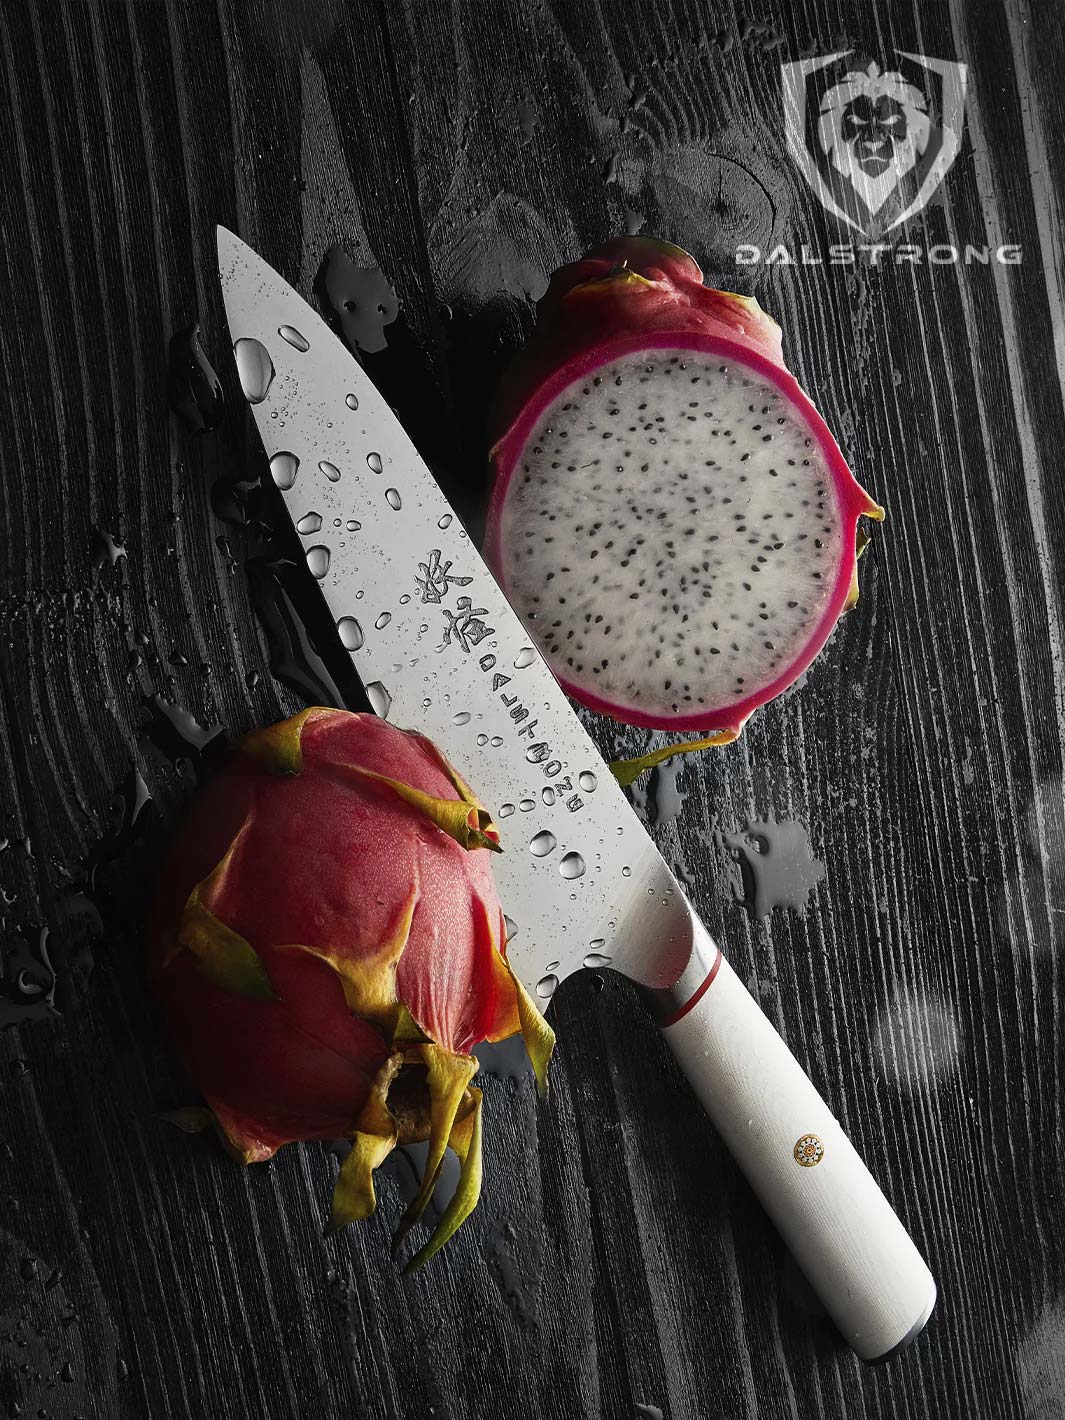 Dalstrong phantom series 8 inch chef knife with a dragon fruit cut in half.